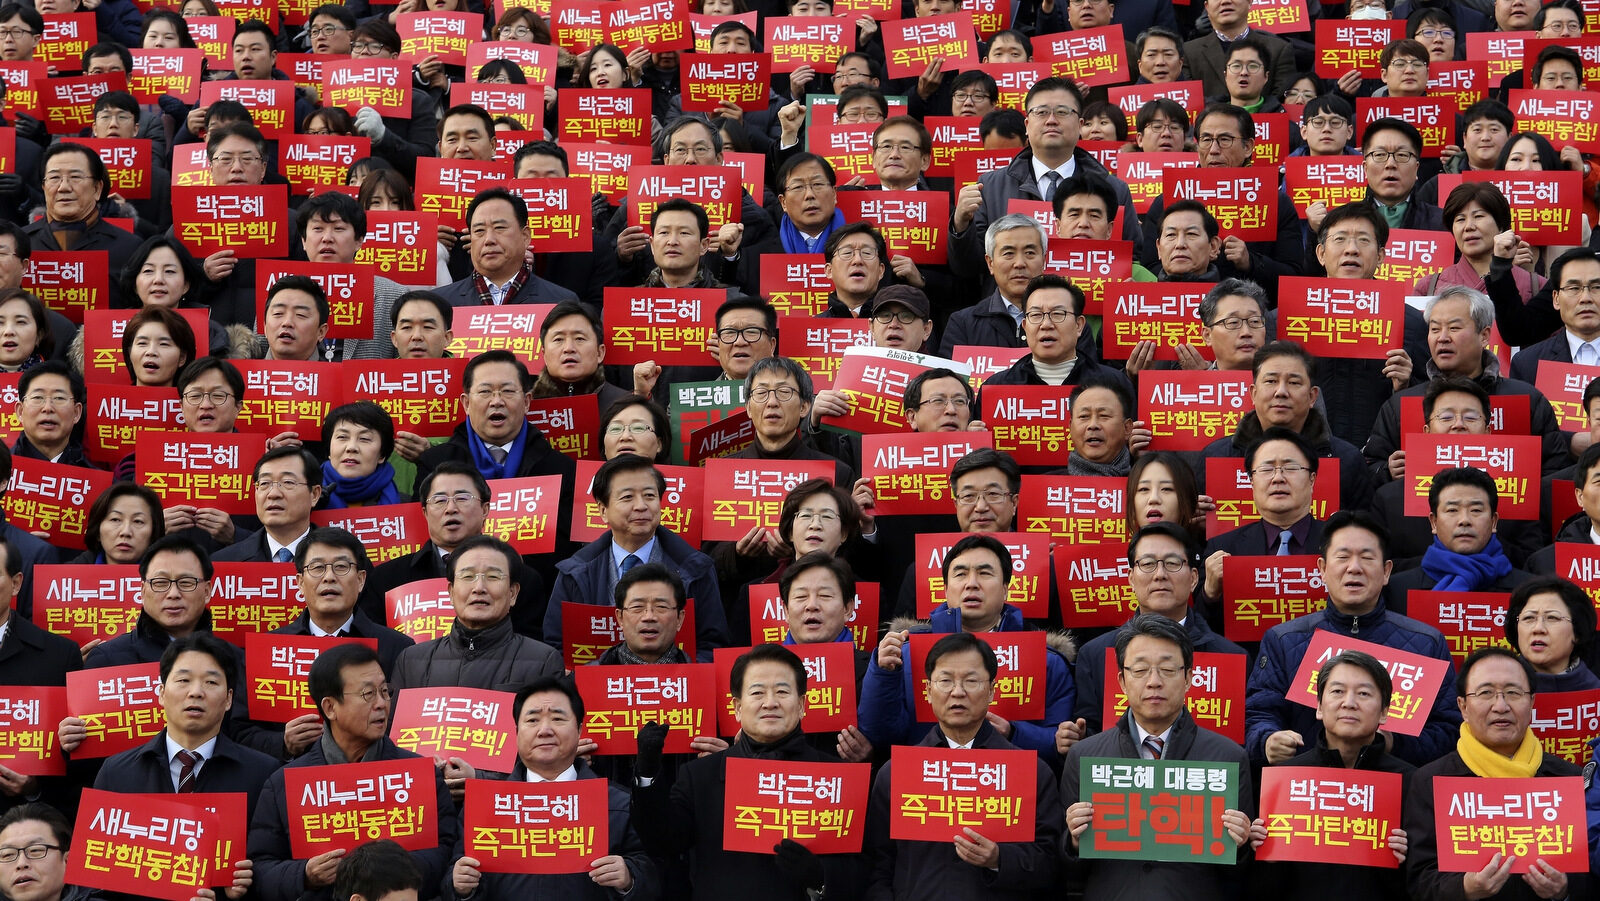 Lawmakers and members of opposition parties hold cards during a rally demanding the impeachment of South Korean President Park Geun-hye at the National Assembly in Seoul, South Korea, Wednesday, Dec. 7, 2016. Park, who faces impeachment this week, rose to power with the support of conservatives enamored of the economic growth ushered in by her late dictator father decades ago. The sign read "President Park Geun-hye" and "Impeachment !". (AP Photo/Ahn Young-joon)